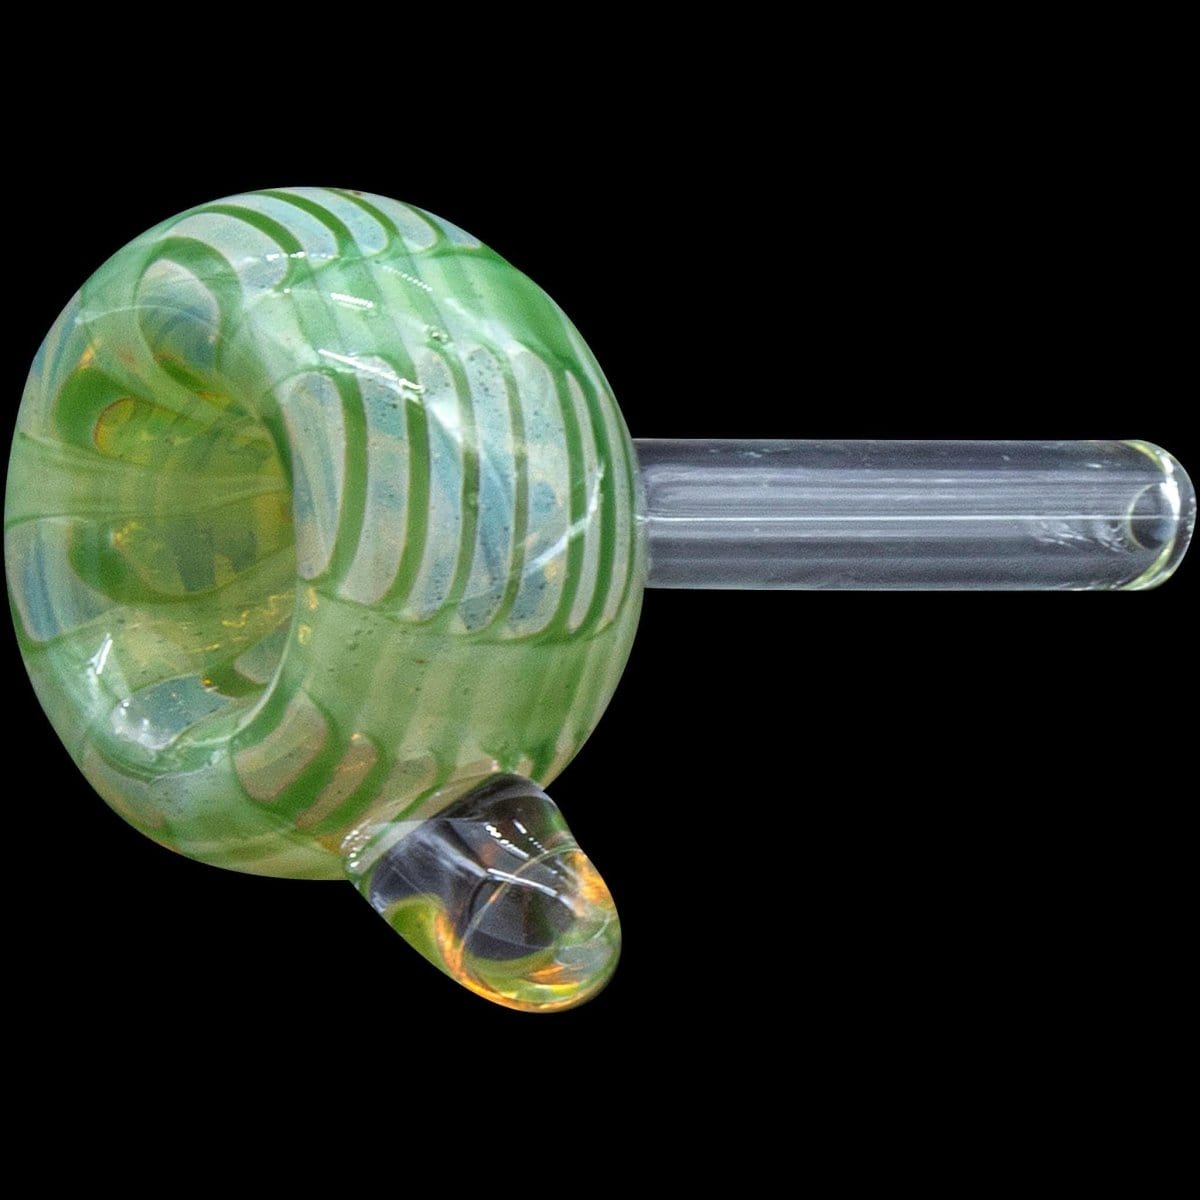 LA Pipes Smoking Accessory Green Color Raked Bubble Pull-Stem 9mm Slide Bowl